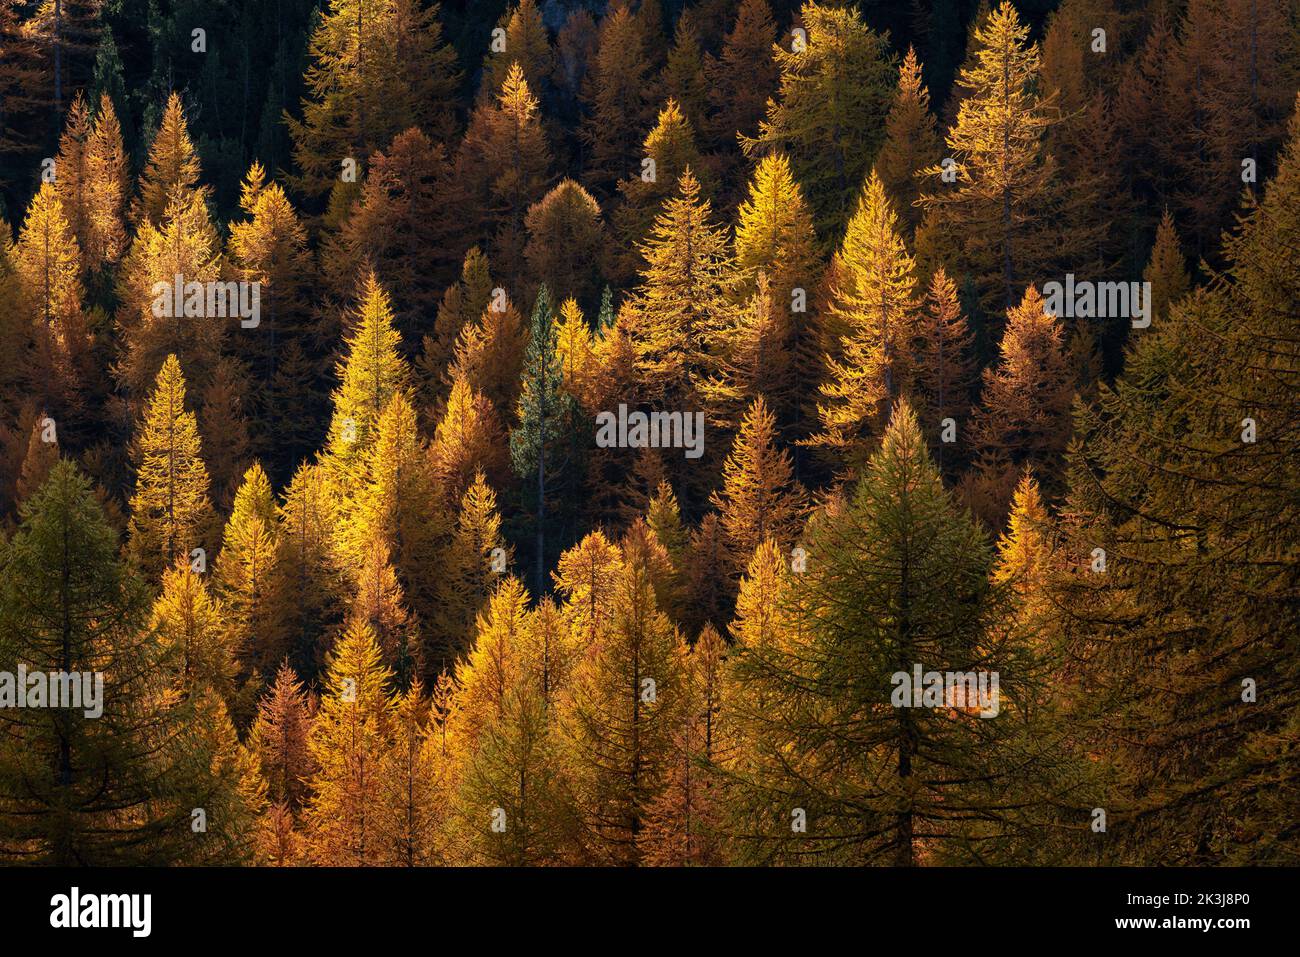 Forest of larch trees in glowing autumn colors in the Ecrins National Park. Fall in the Oisans Massif, La Grave, Hautes Alpes, Alps, France Stock Photo